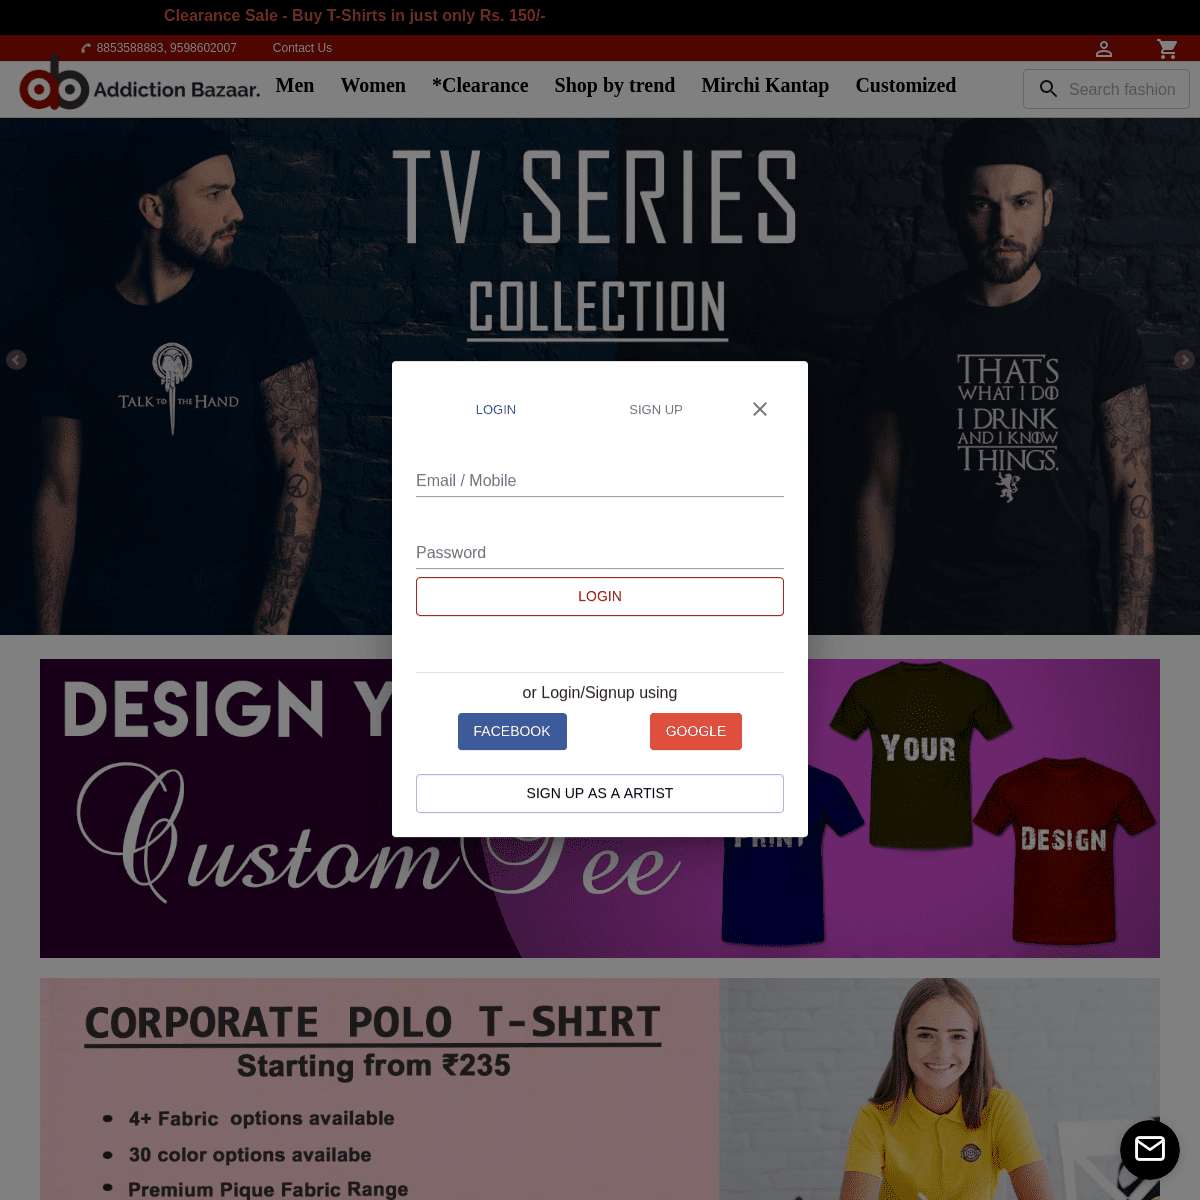 An online website to print and customize Tshirts, Hoodies and Sweat Shirts - Addiction Bazaar